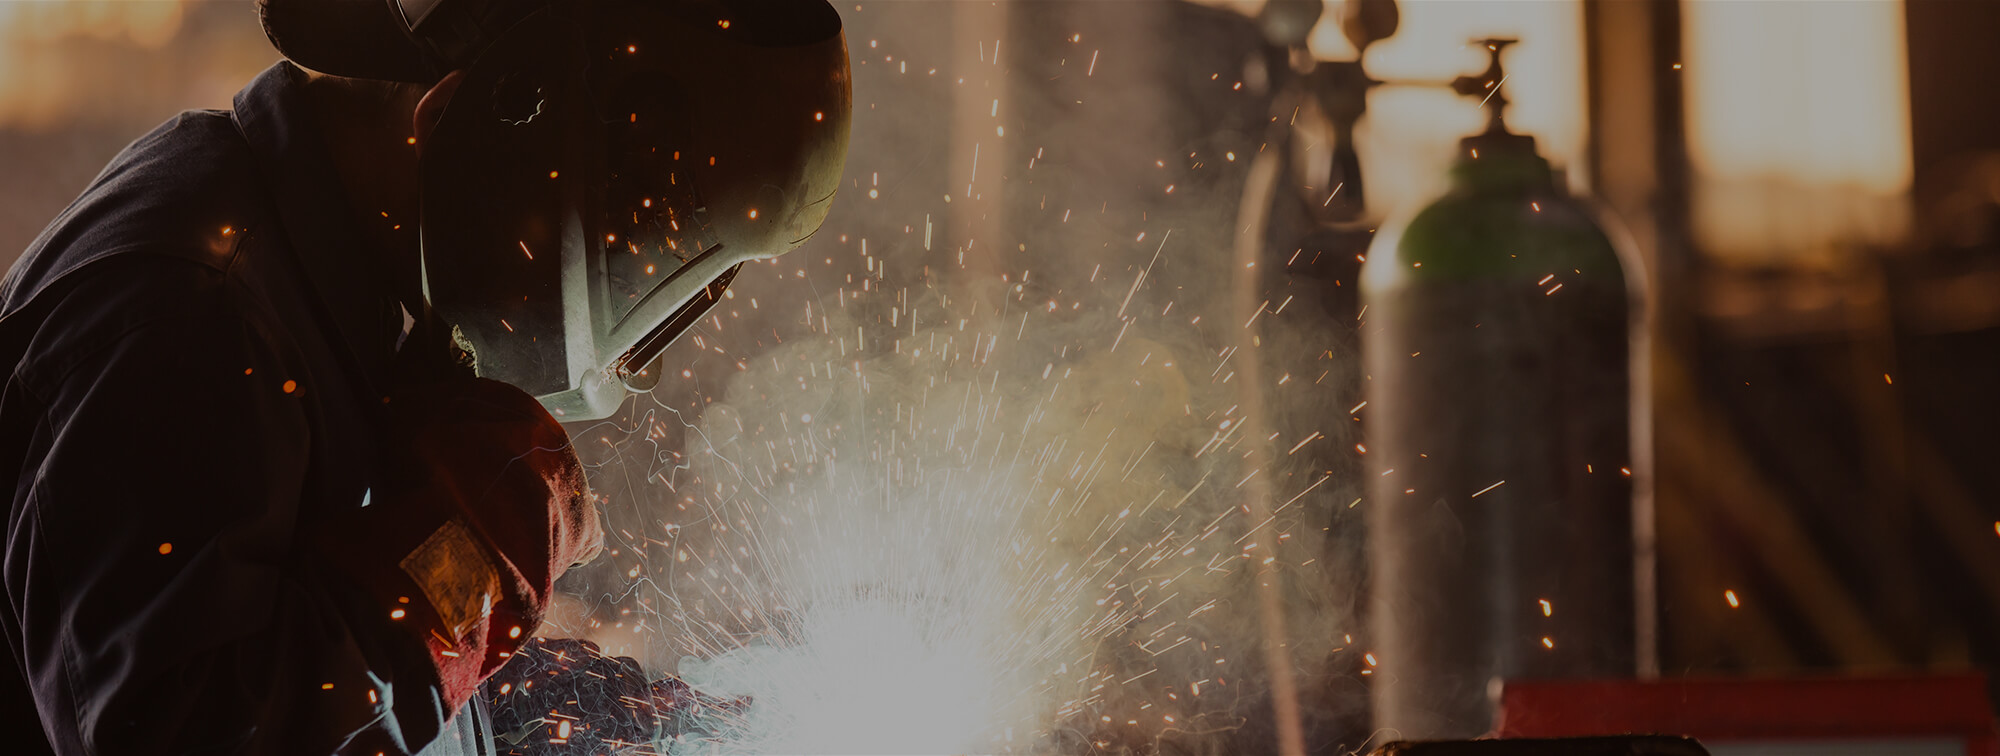 Shop technician welding with a welders mask and flying sparks